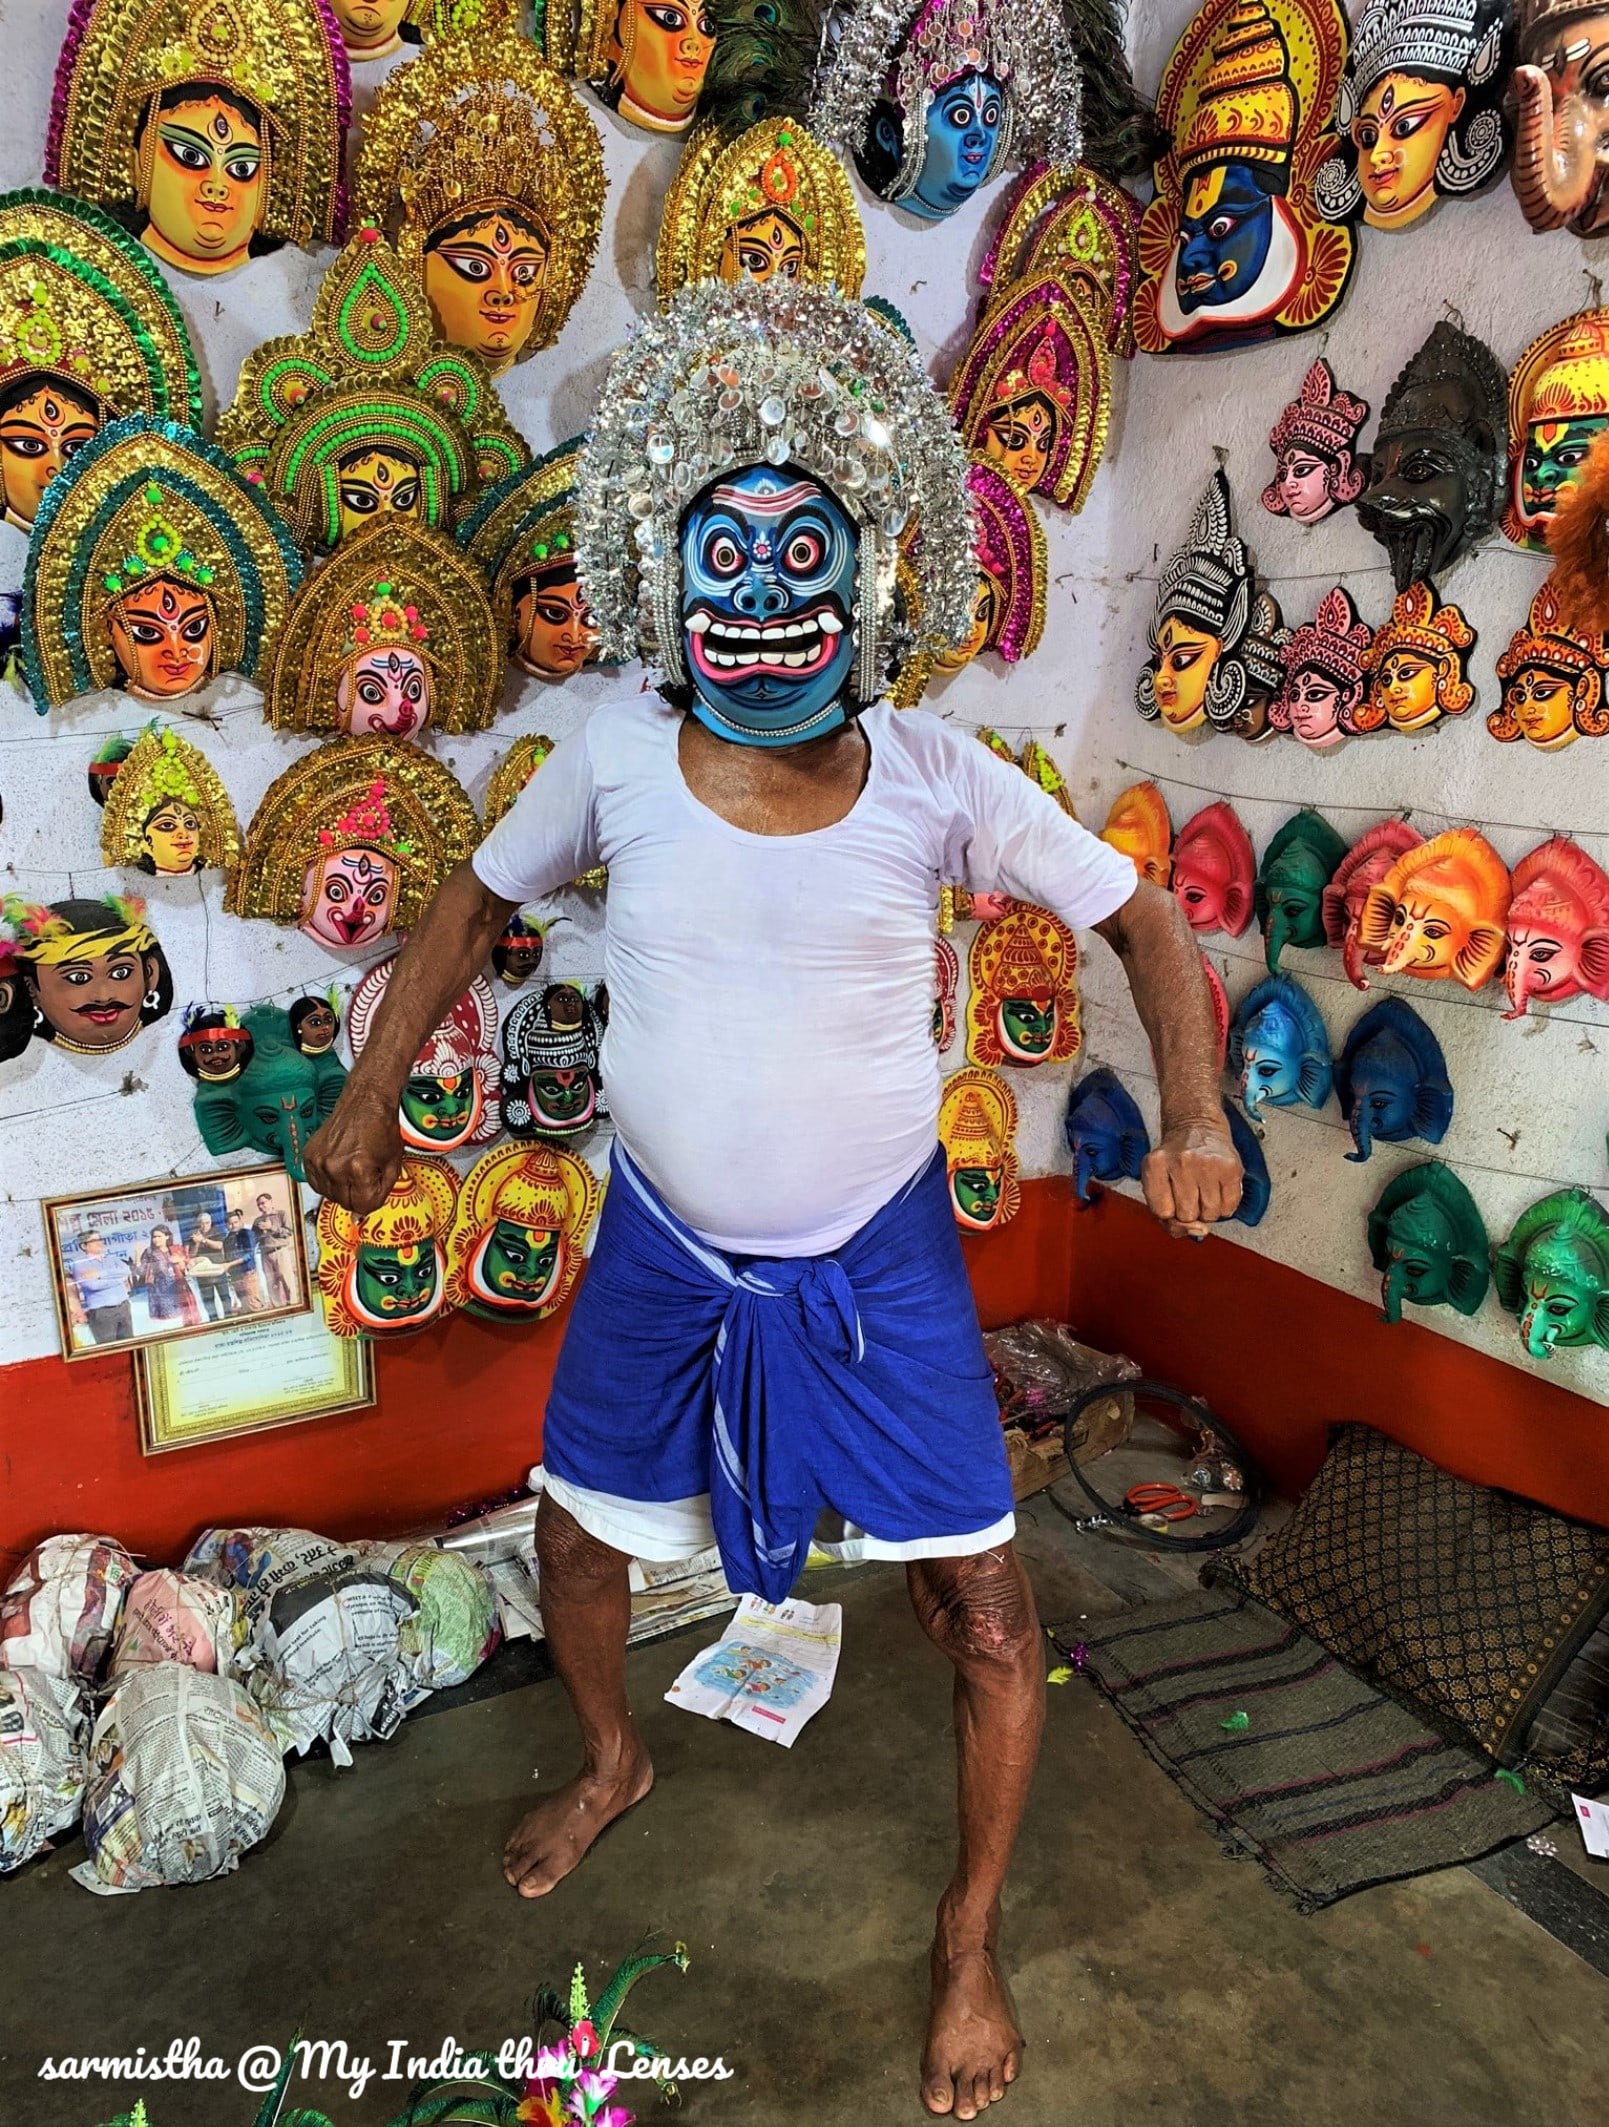 The Artisan posing for us with a demon mask